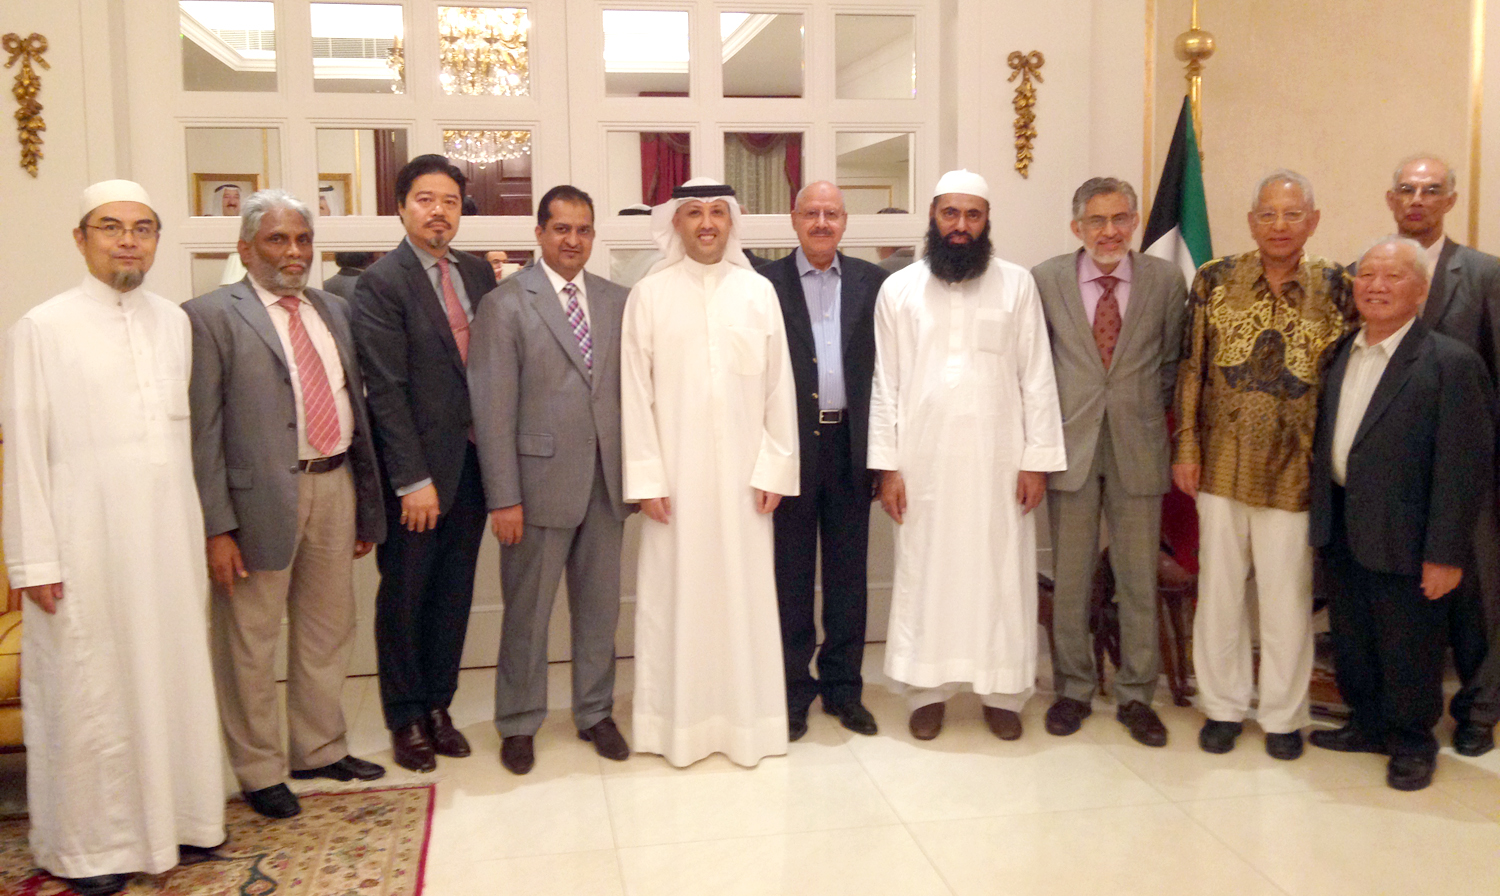 Kuwaiti consul discusses cooperation with Islamic centers in Hong Kong